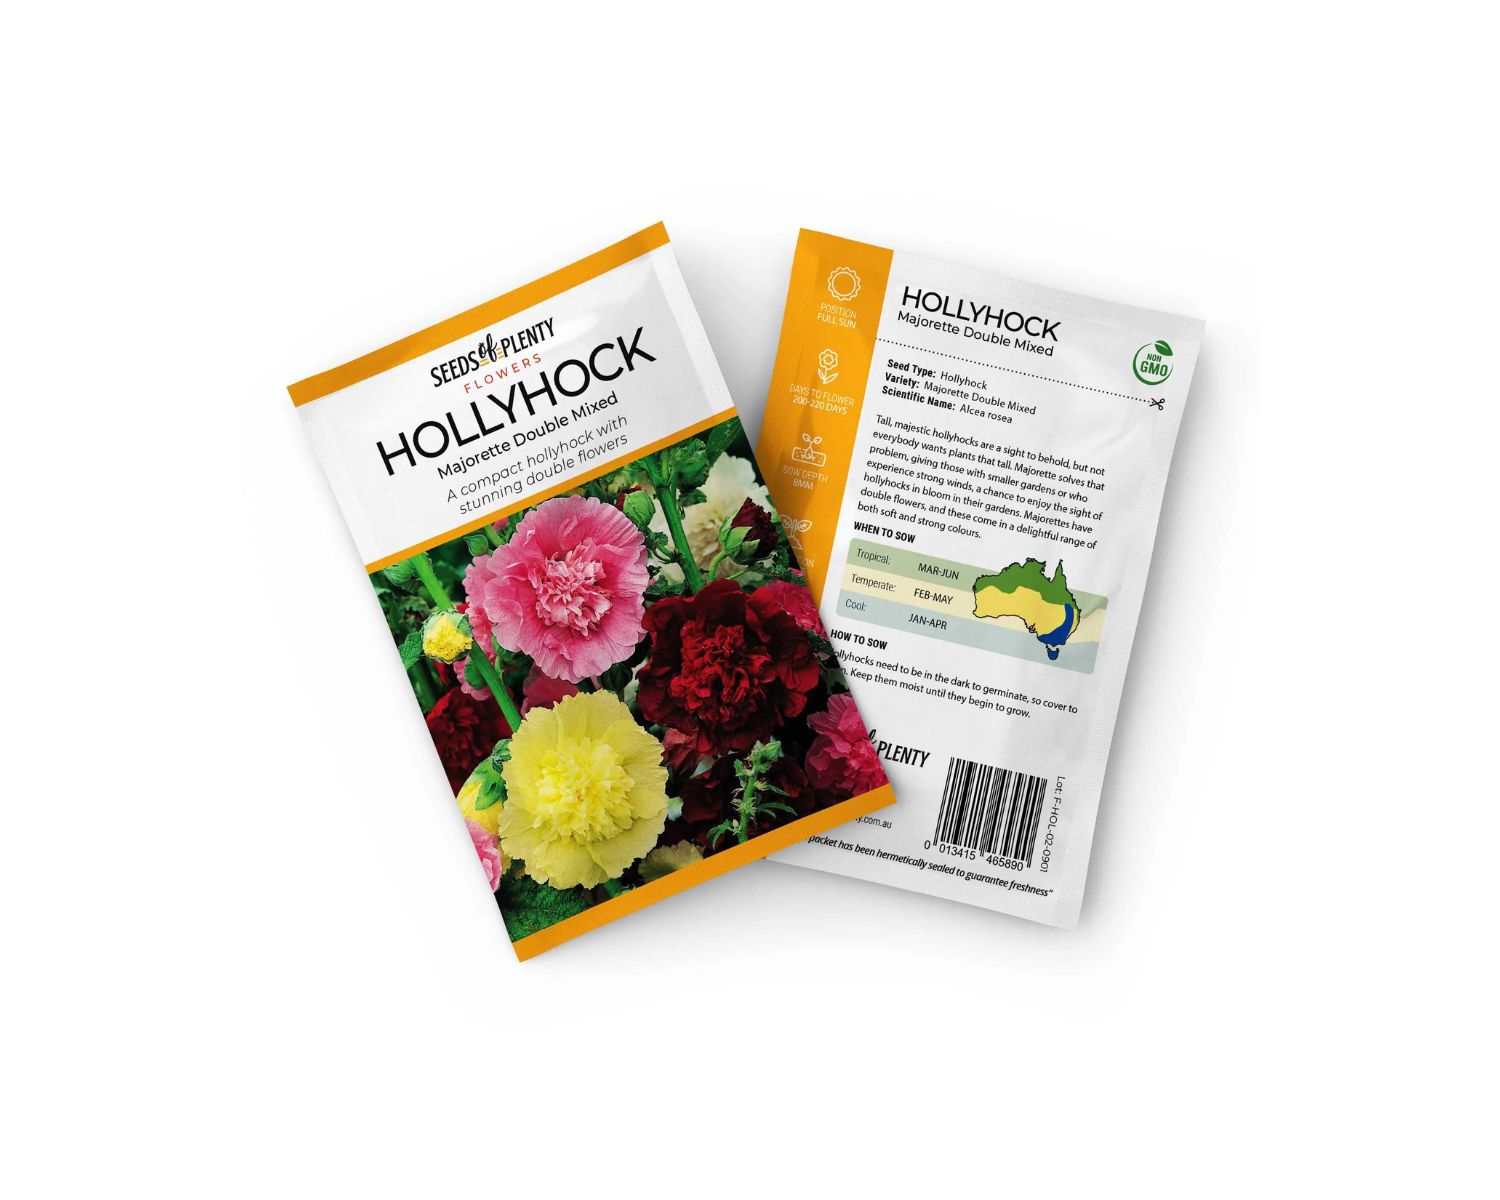 When Can I Plant Hollyhock Seeds